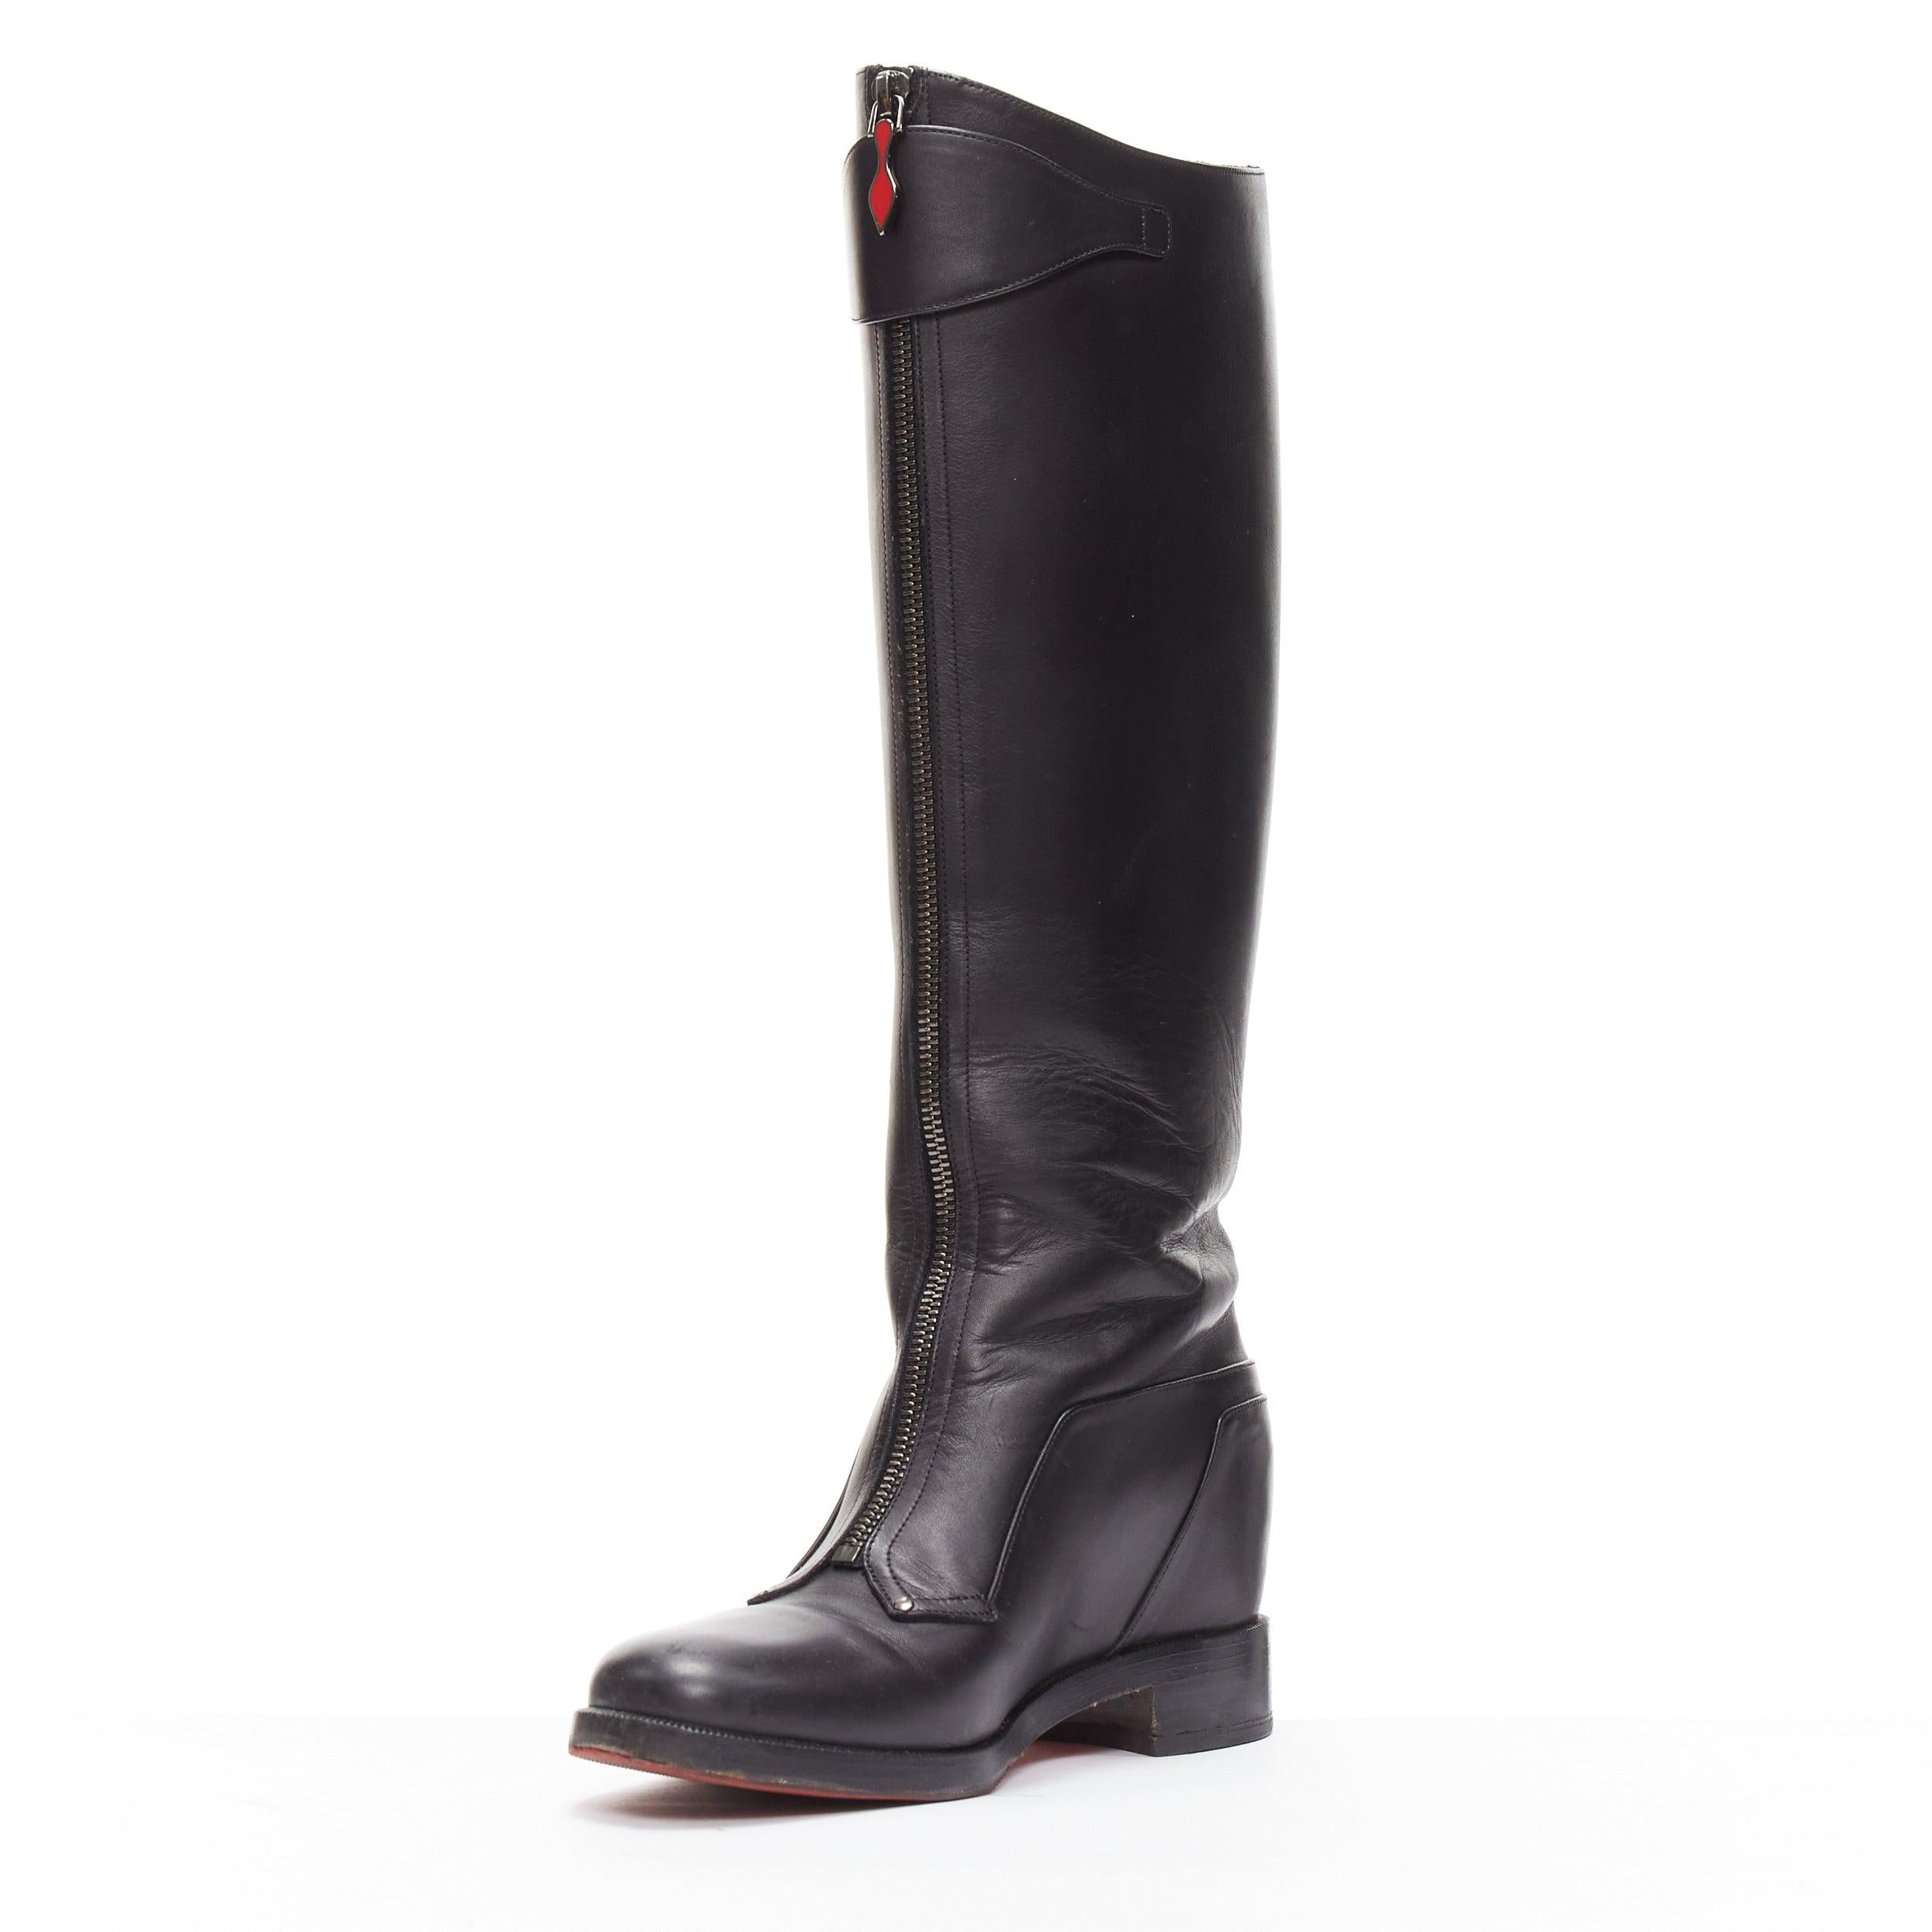 CHRISTIAN LOUBOUTIN black leather zip front concealed wedge riding boot EU40 For Sale 1